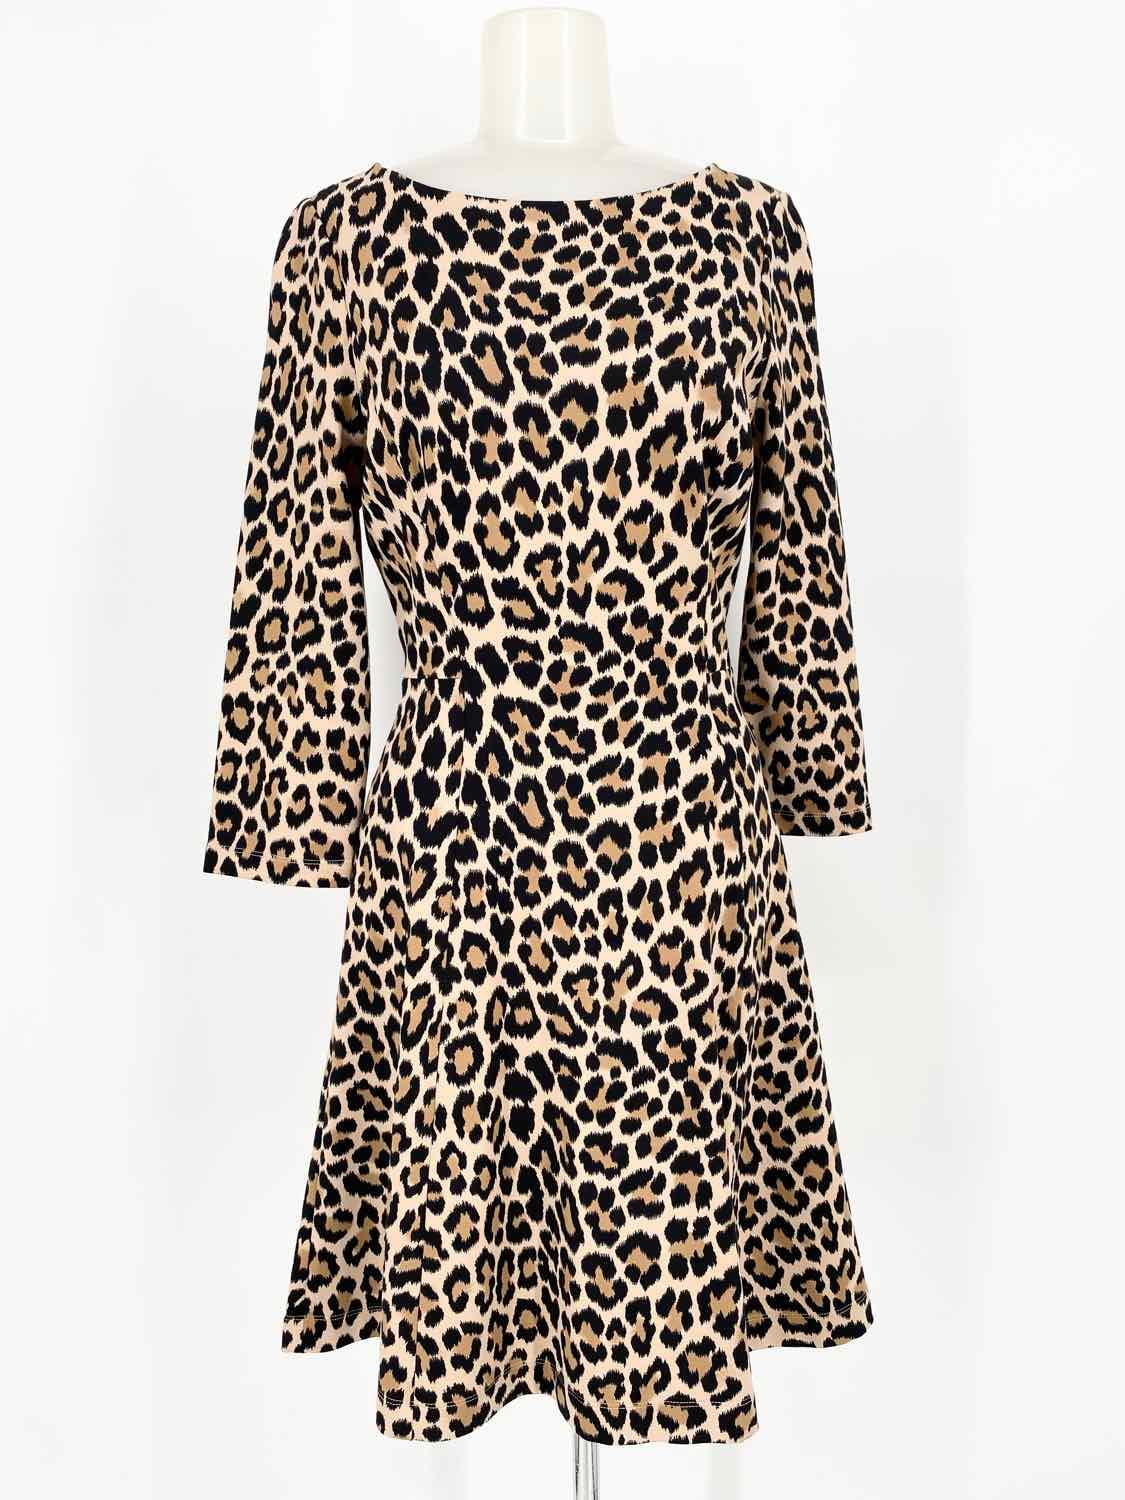 Kate Spade Women's Brown/Black Fit & Flare Animal Print Size 6 Dress -  Article Consignment